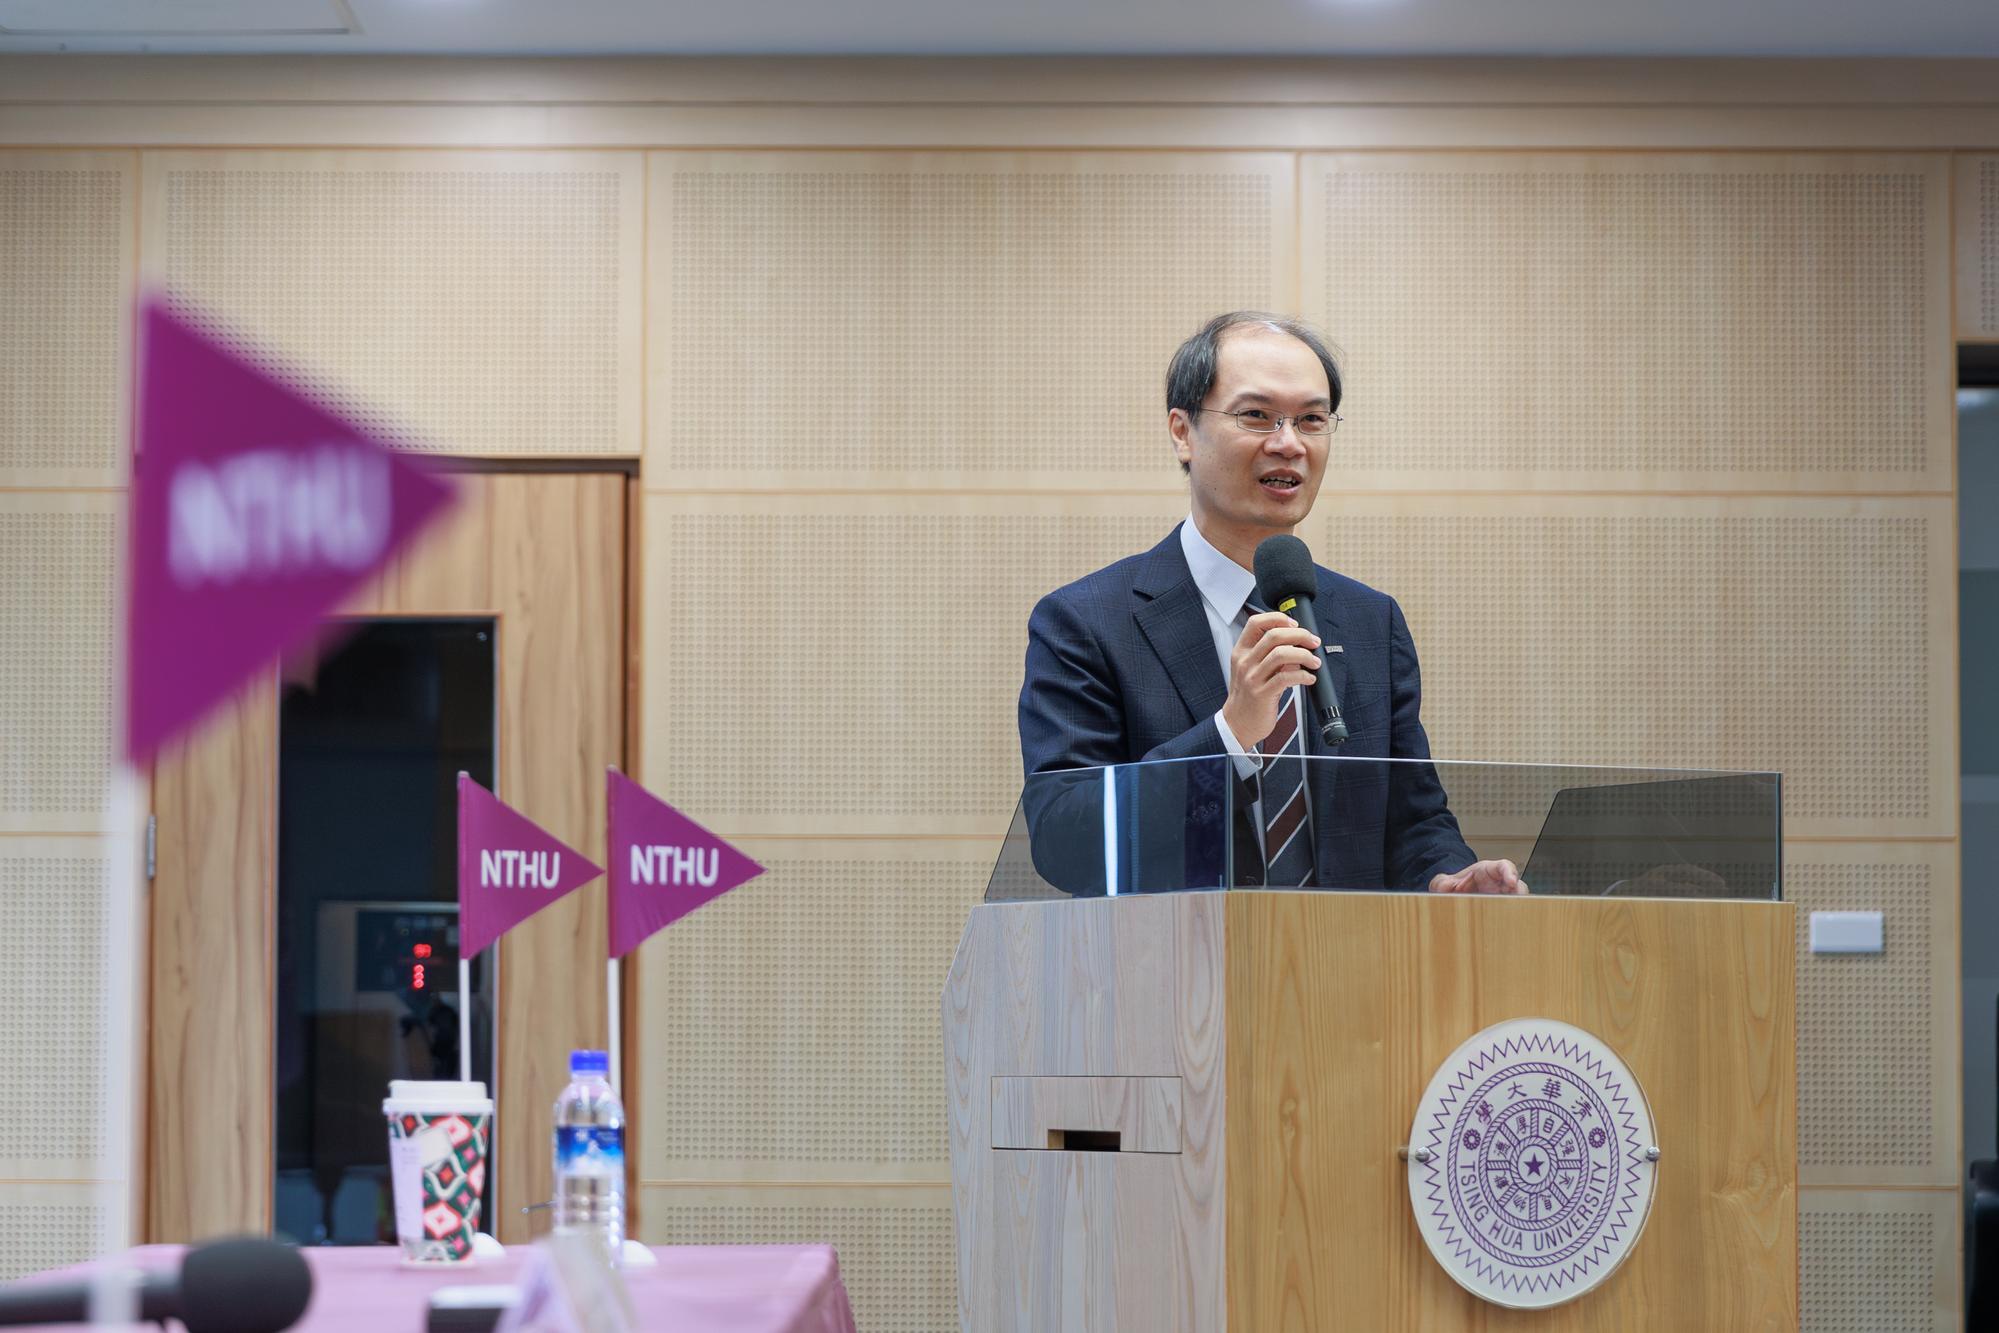 Po-Wen Chiu (邱博文), Vice President for Research and Development, foresees NVIDIA taking the lead in AI healthcare and expects fruitful collaborations in precision medicine.